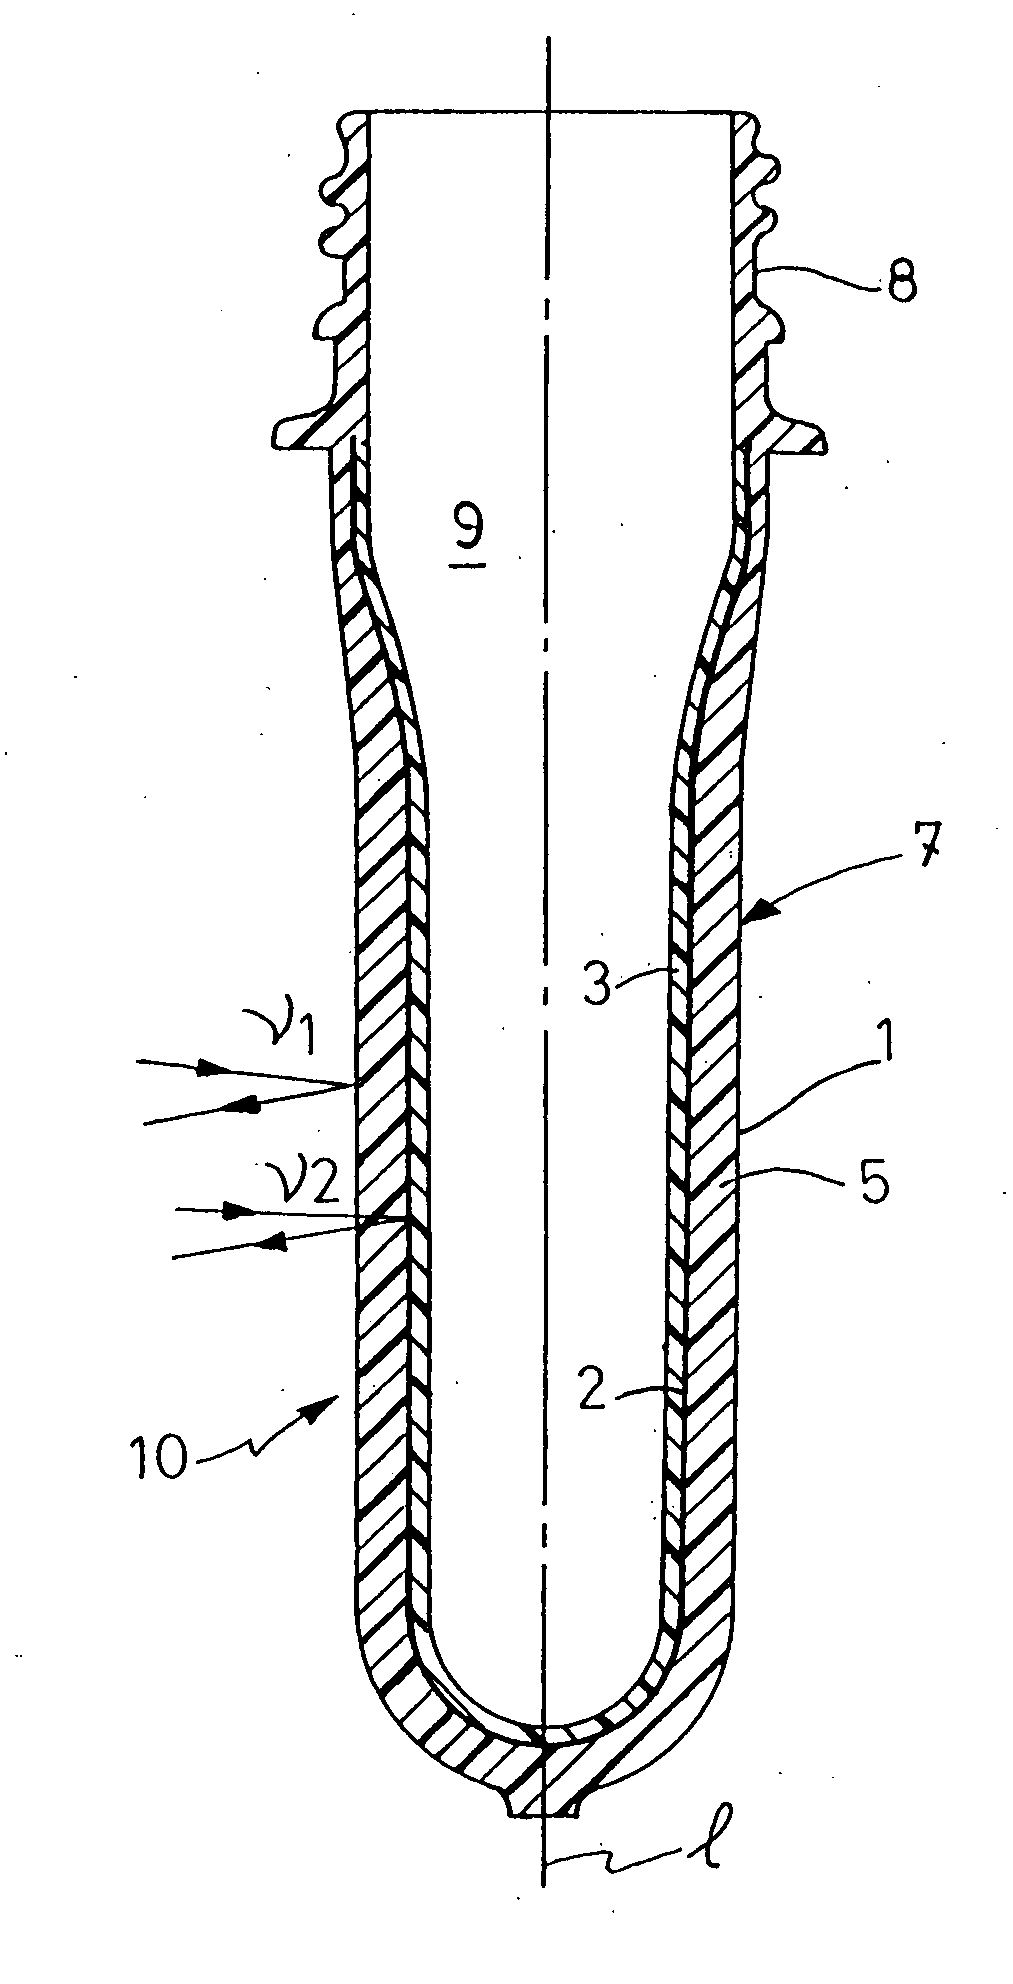 Preform and Container for Radiosensitive Products and Method for the Manufacturing Thereof